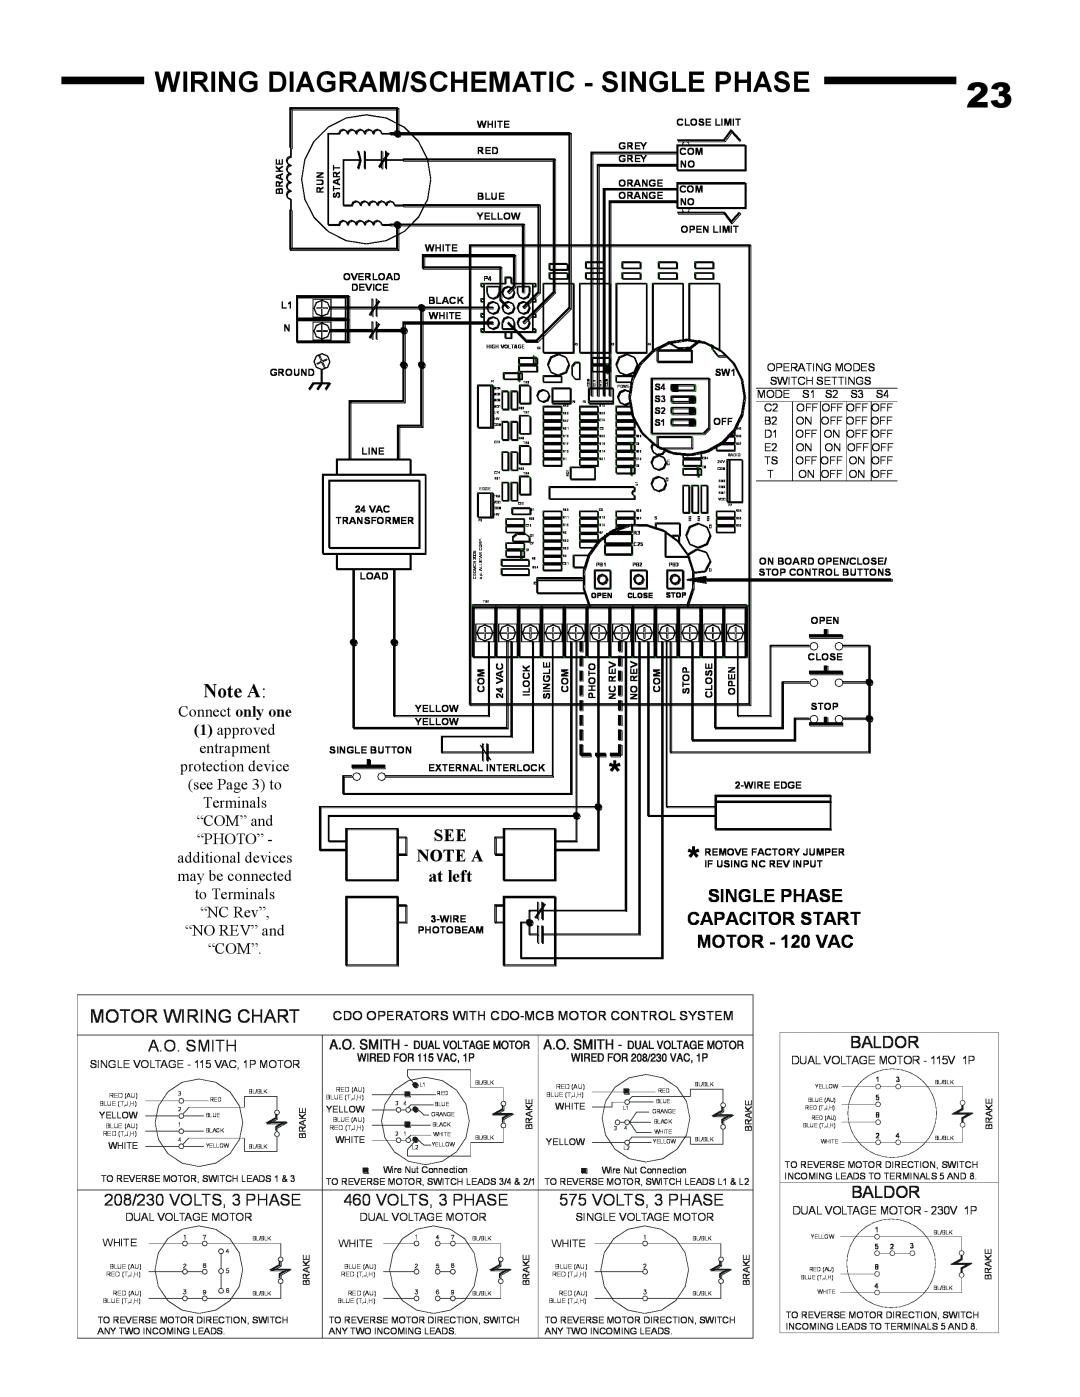 Linear AUH-S Wiring Diagram/Schematic - Single Phase, Note A, SINGLE PHASE CAPACITOR START MOTOR - 120 VAC, A.O. Smith 